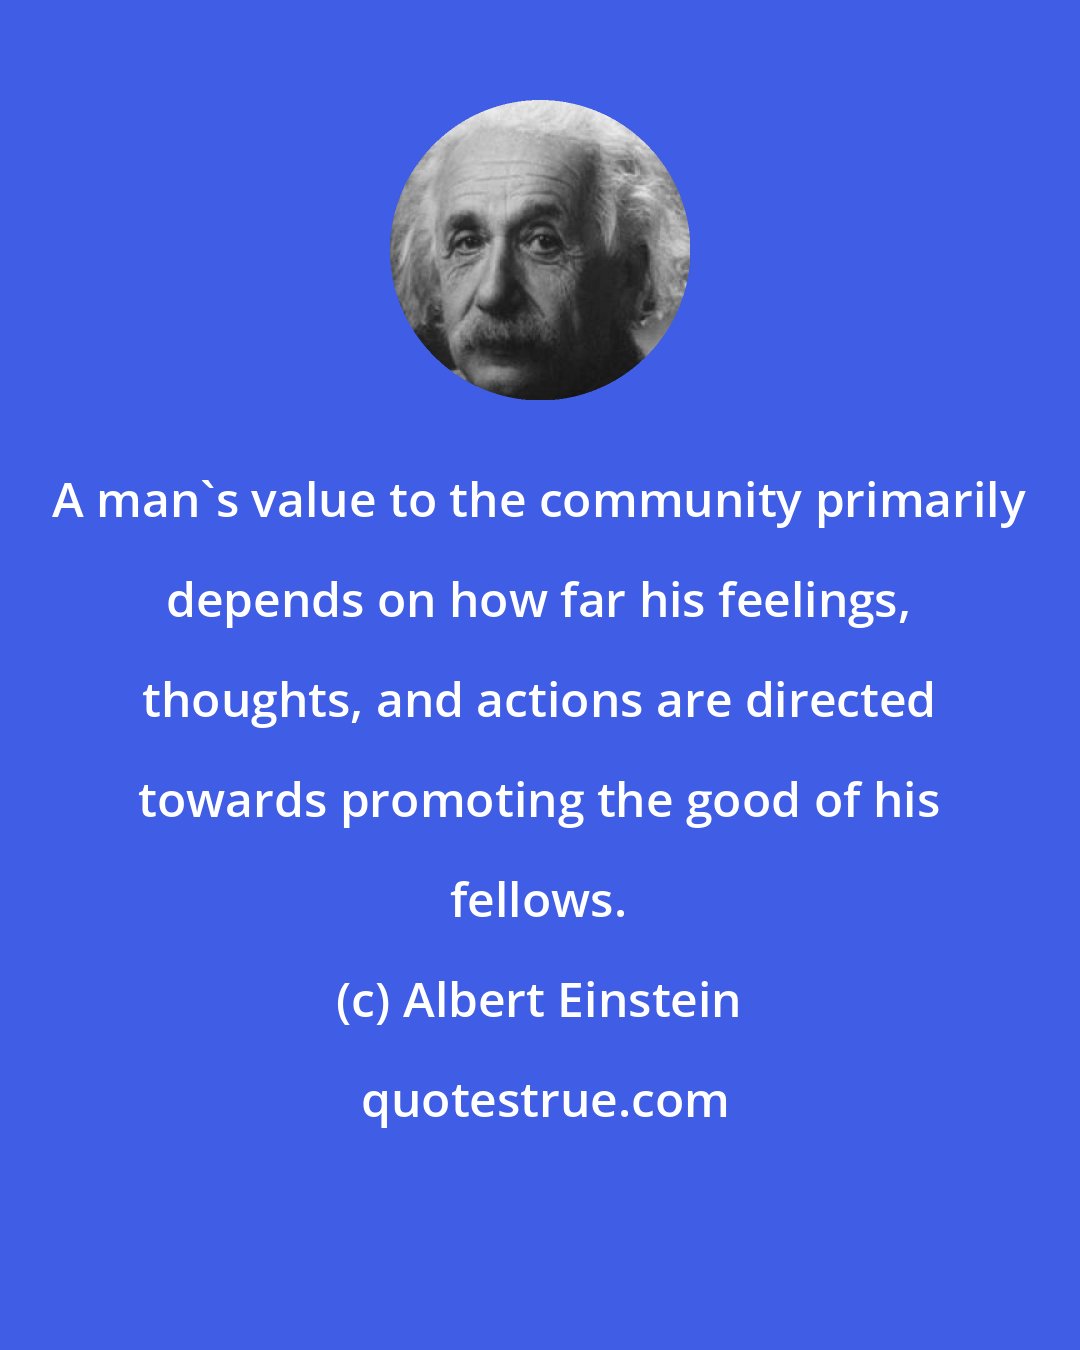 Albert Einstein: A man's value to the community primarily depends on how far his feelings, thoughts, and actions are directed towards promoting the good of his fellows.